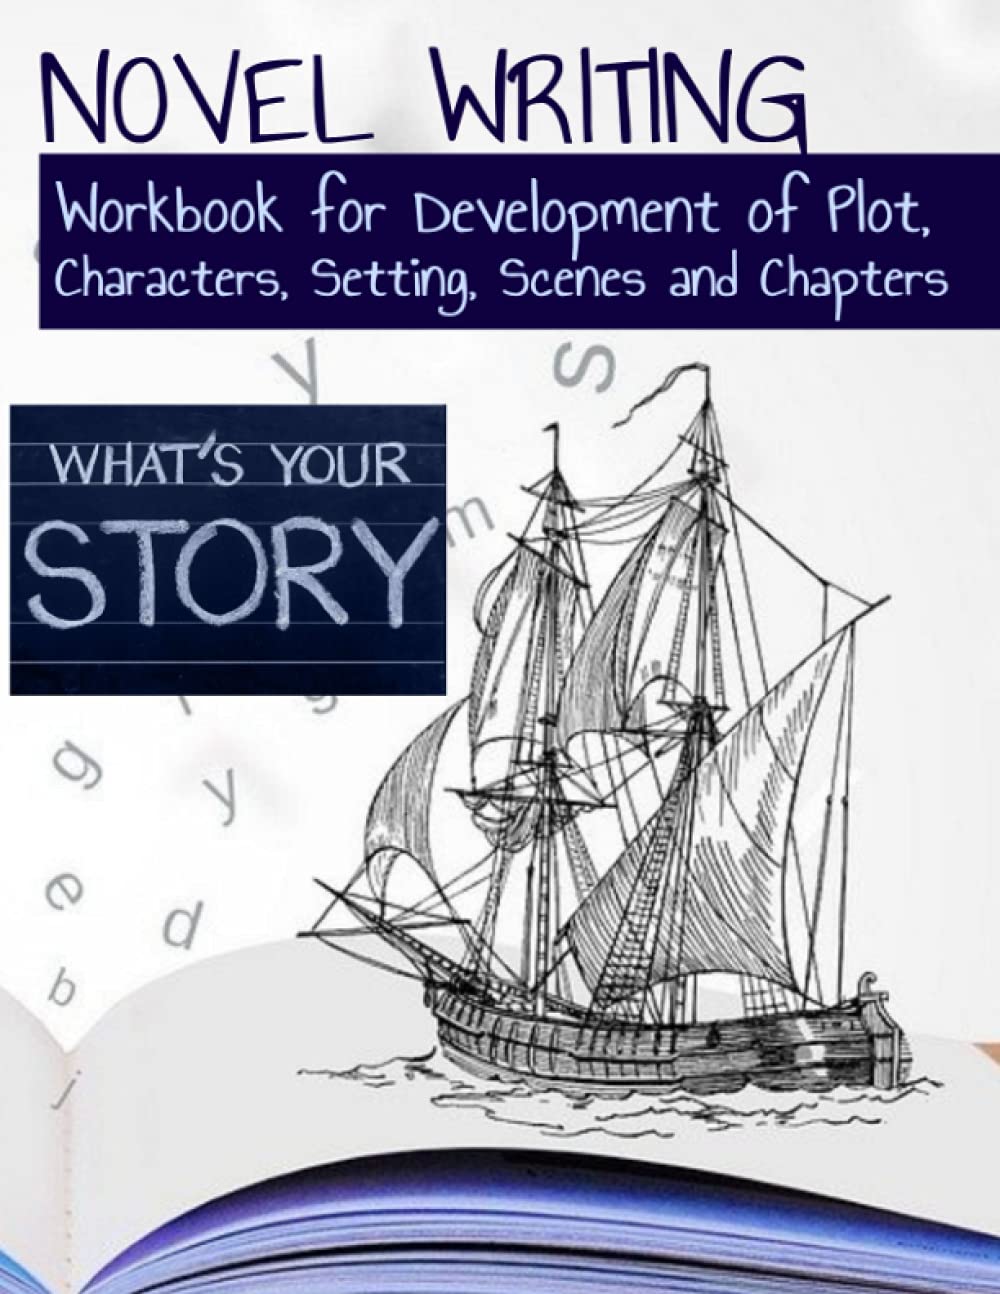 Novel Writing: Workbook for Development of Plot, Characters, Setting, Scenes and Chapters